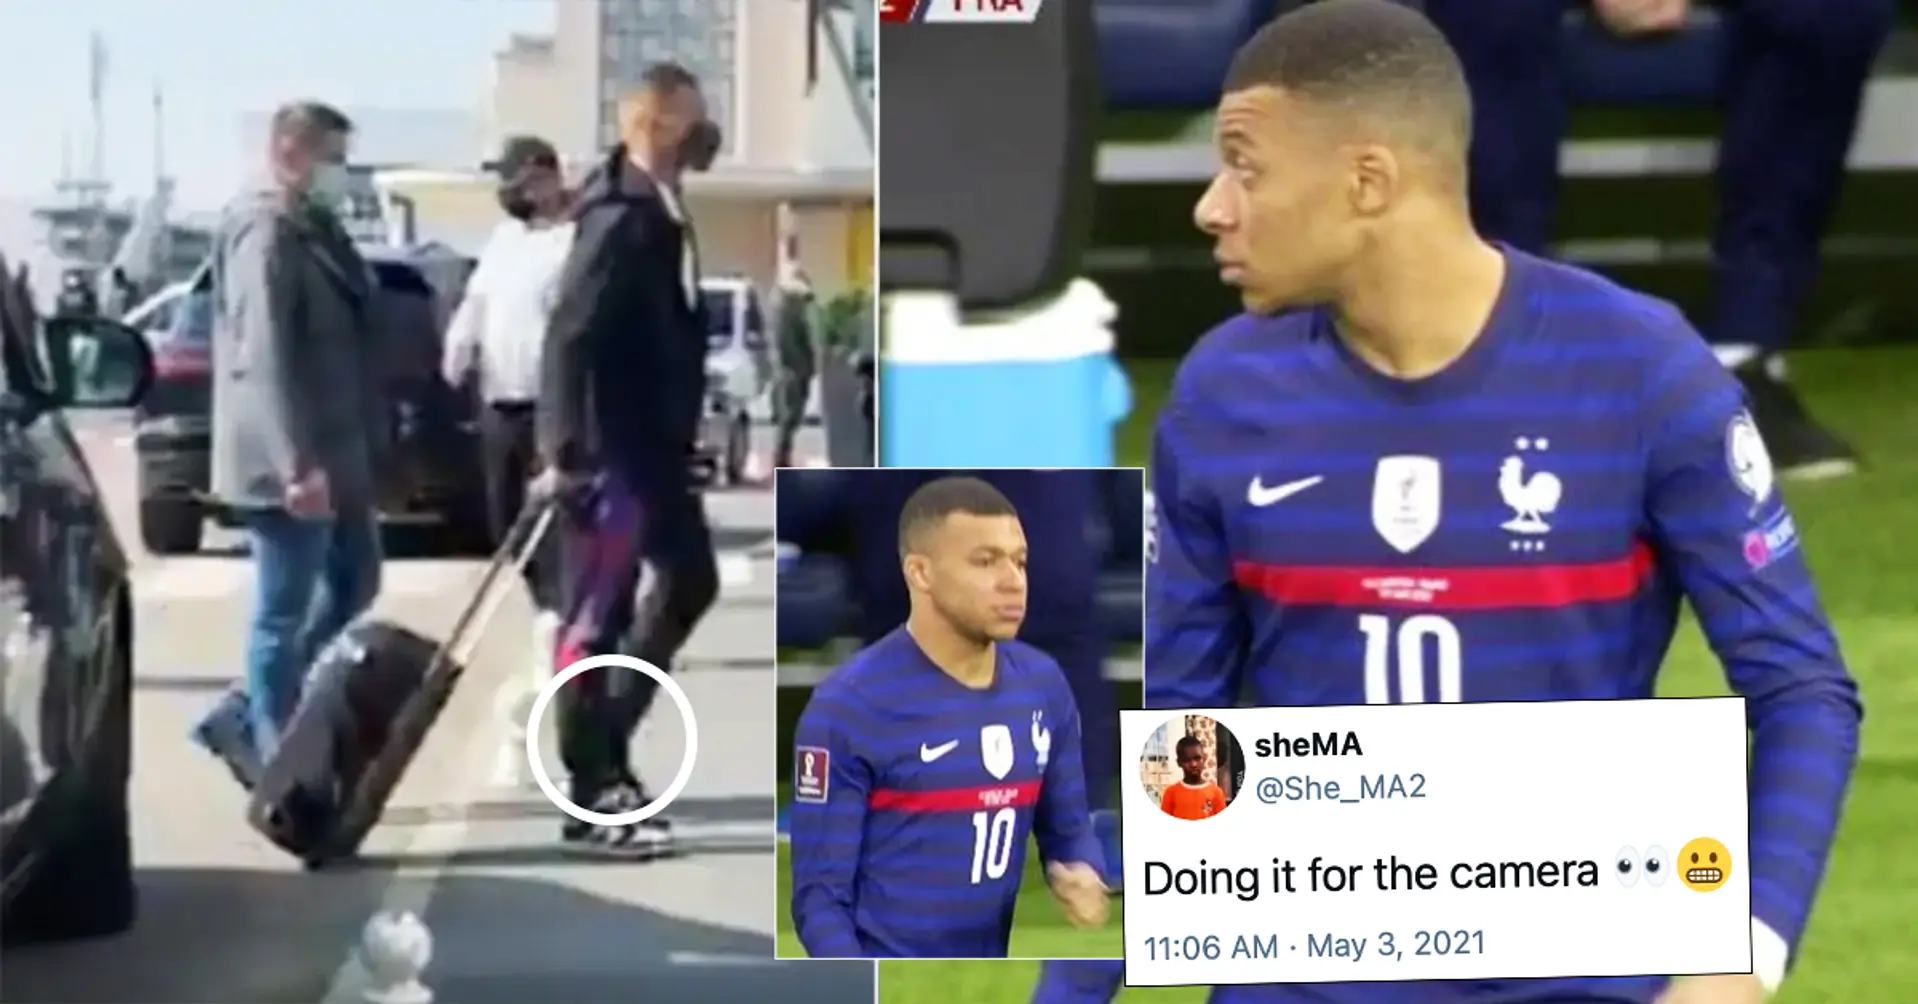 Mind games Fans accuse Kylian Mbappe of 'acting up for the camera' after spotting him in Manchester